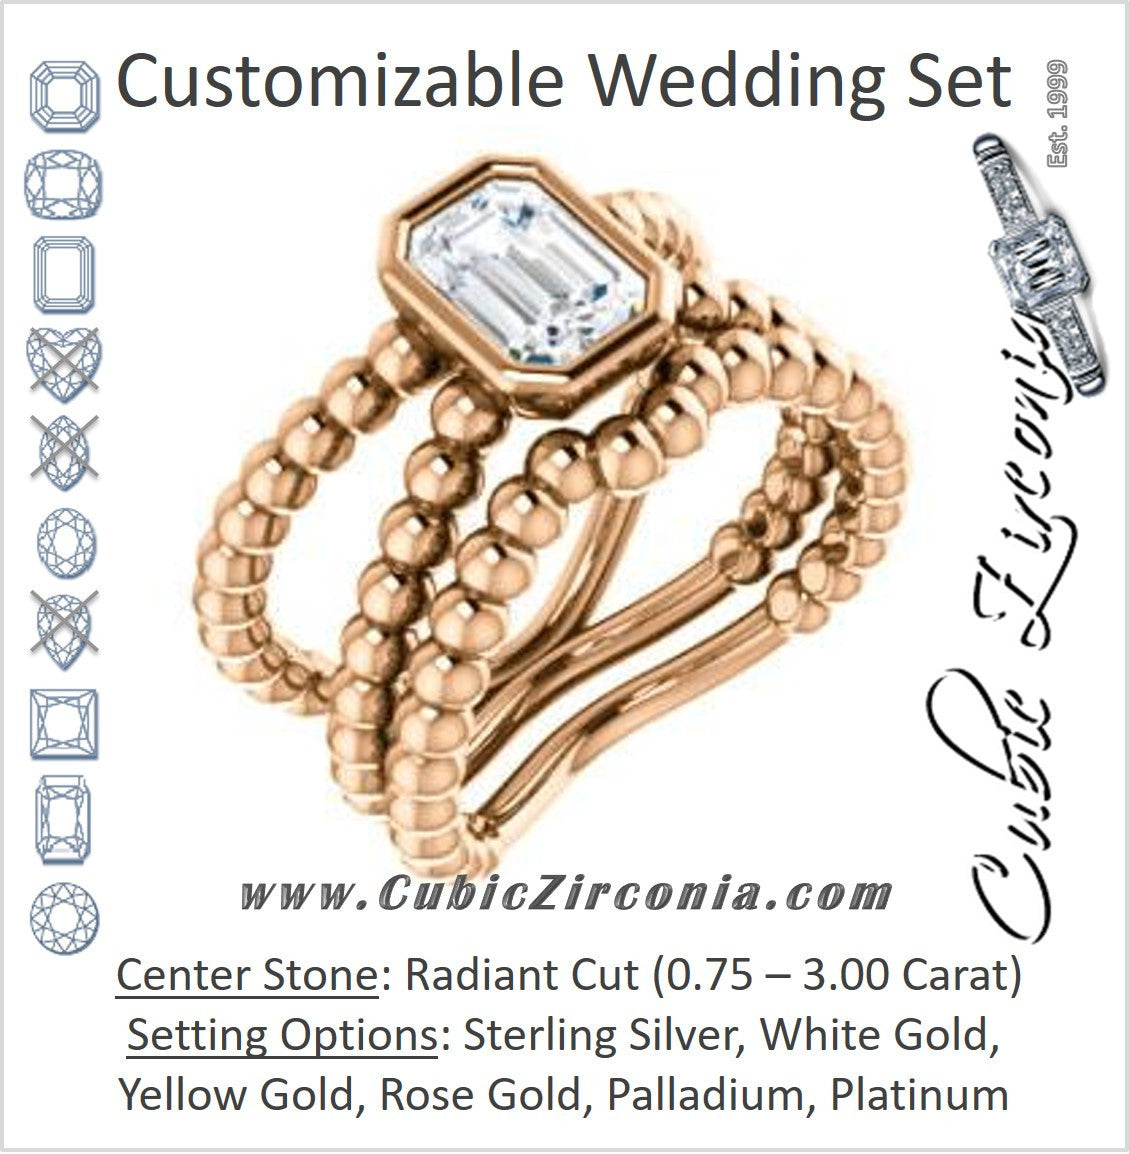 CZ Wedding Set, featuring The Maria Leeslii engagement ring (Customizable Bezel-set Radiant Cut Solitaire with Wide Beaded-Metal Split-Band)